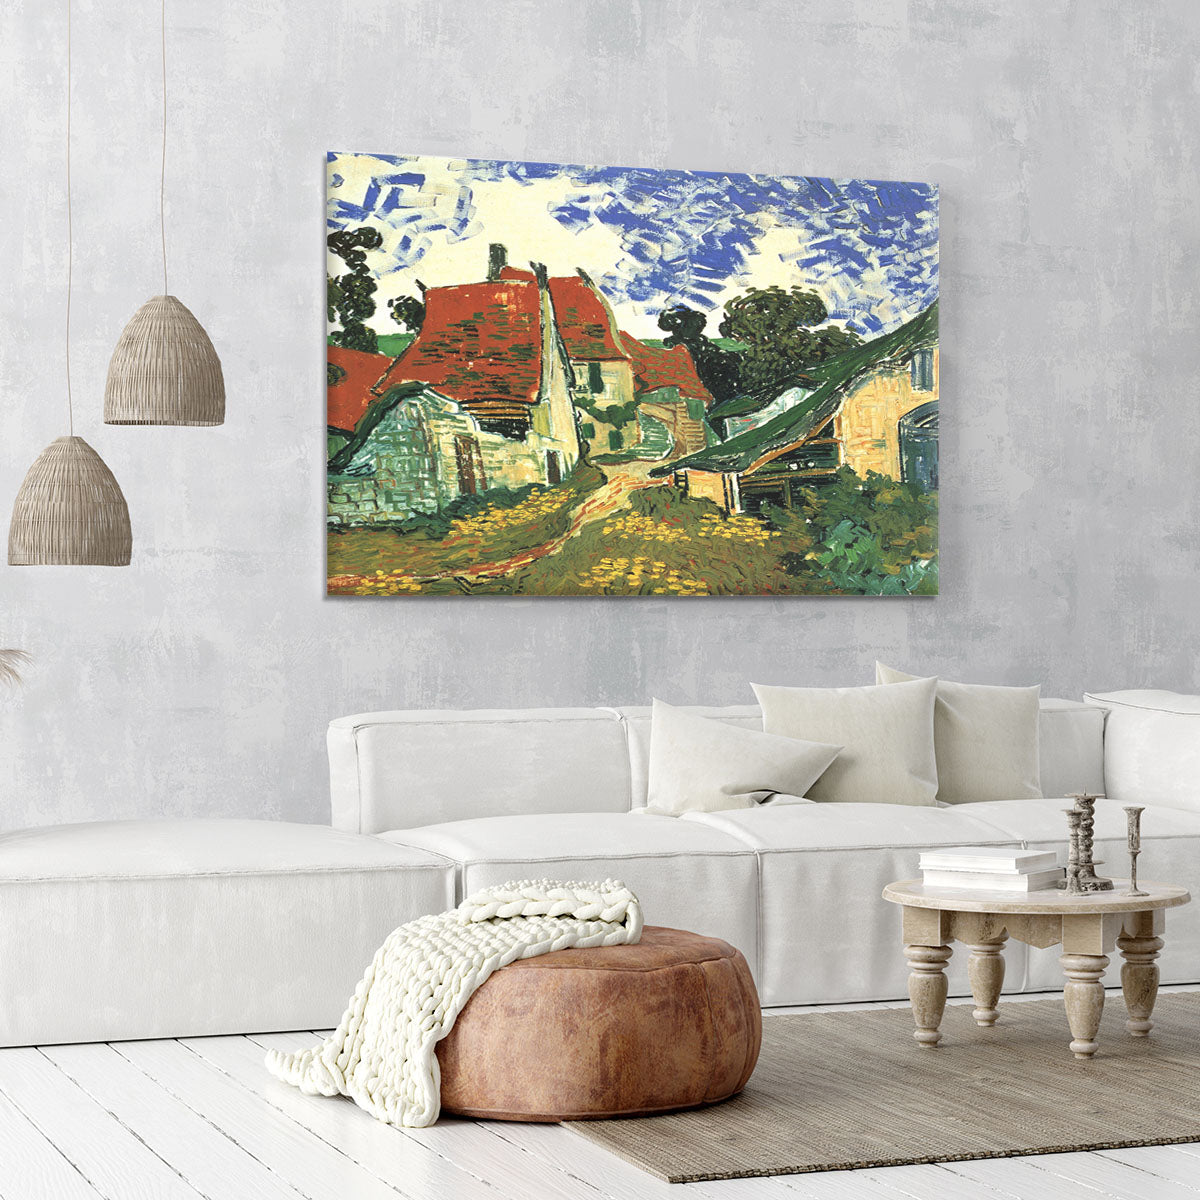 Villages Street in Auvers by Van Gogh Canvas Print or Poster - Canvas Art Rocks - 6